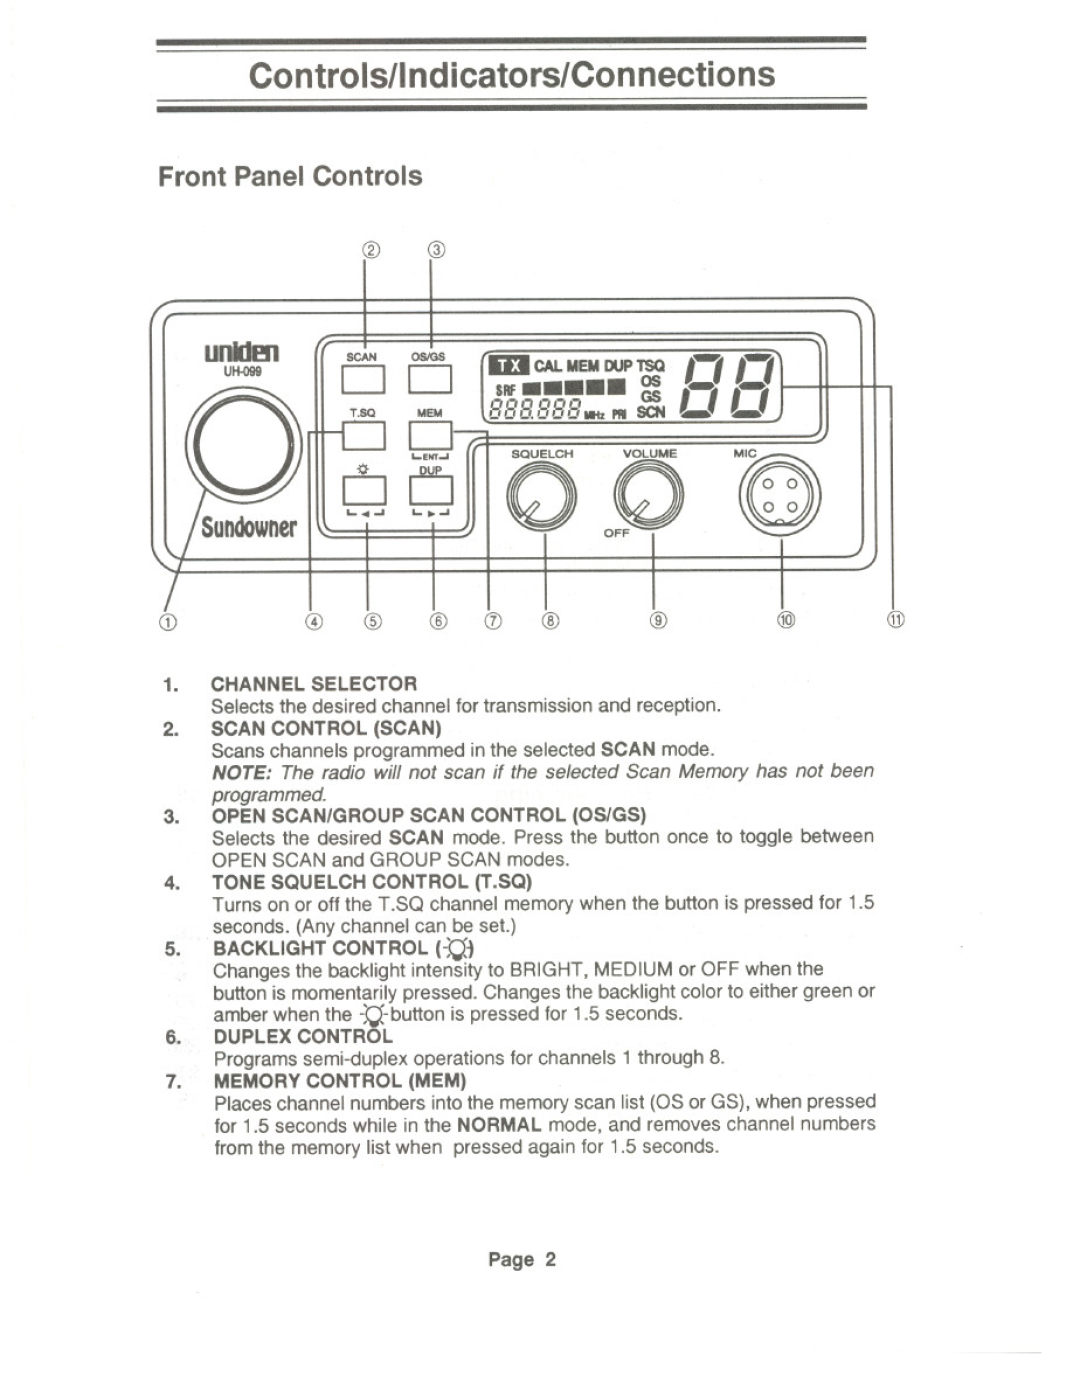 Uniden UH-099 owner manual oLJ Oo~ ~, Contro 15/1nd icators/Con nactio ns, Front Panel Controls, unldl!l1, Page 